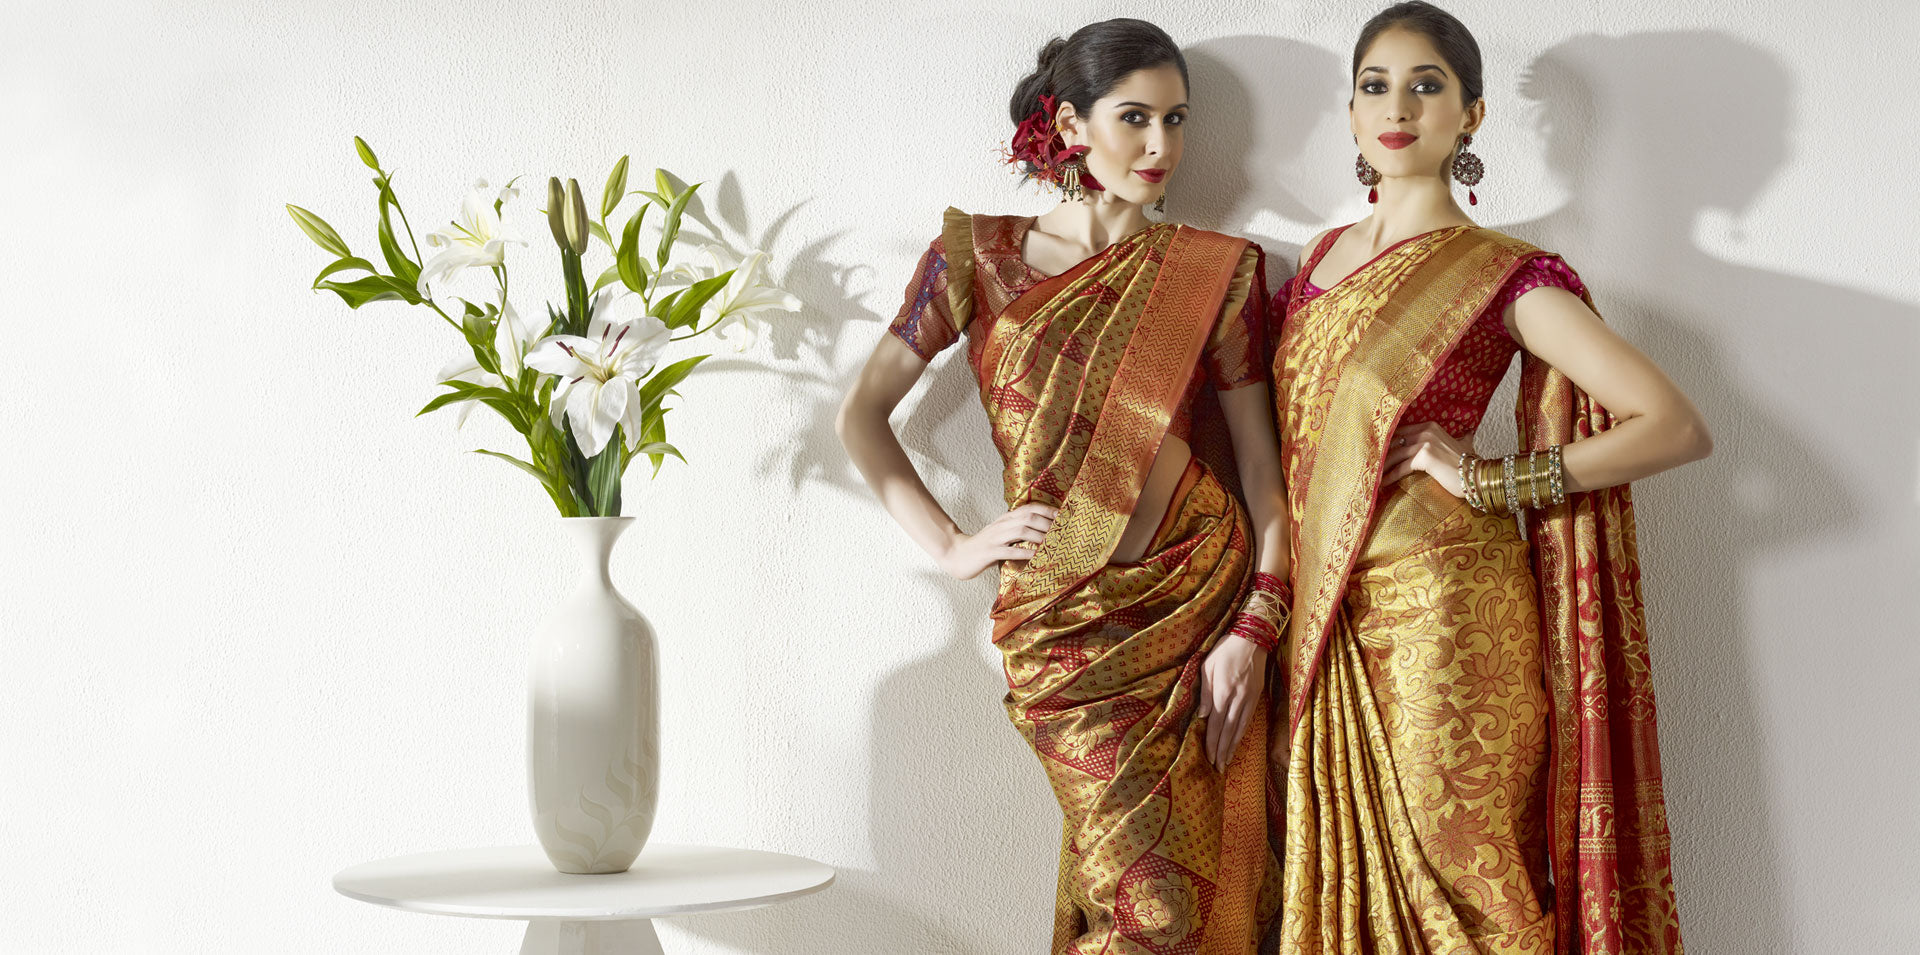 Below 3000 Rs Jacquard silk saree collection / Best quality - YouTube